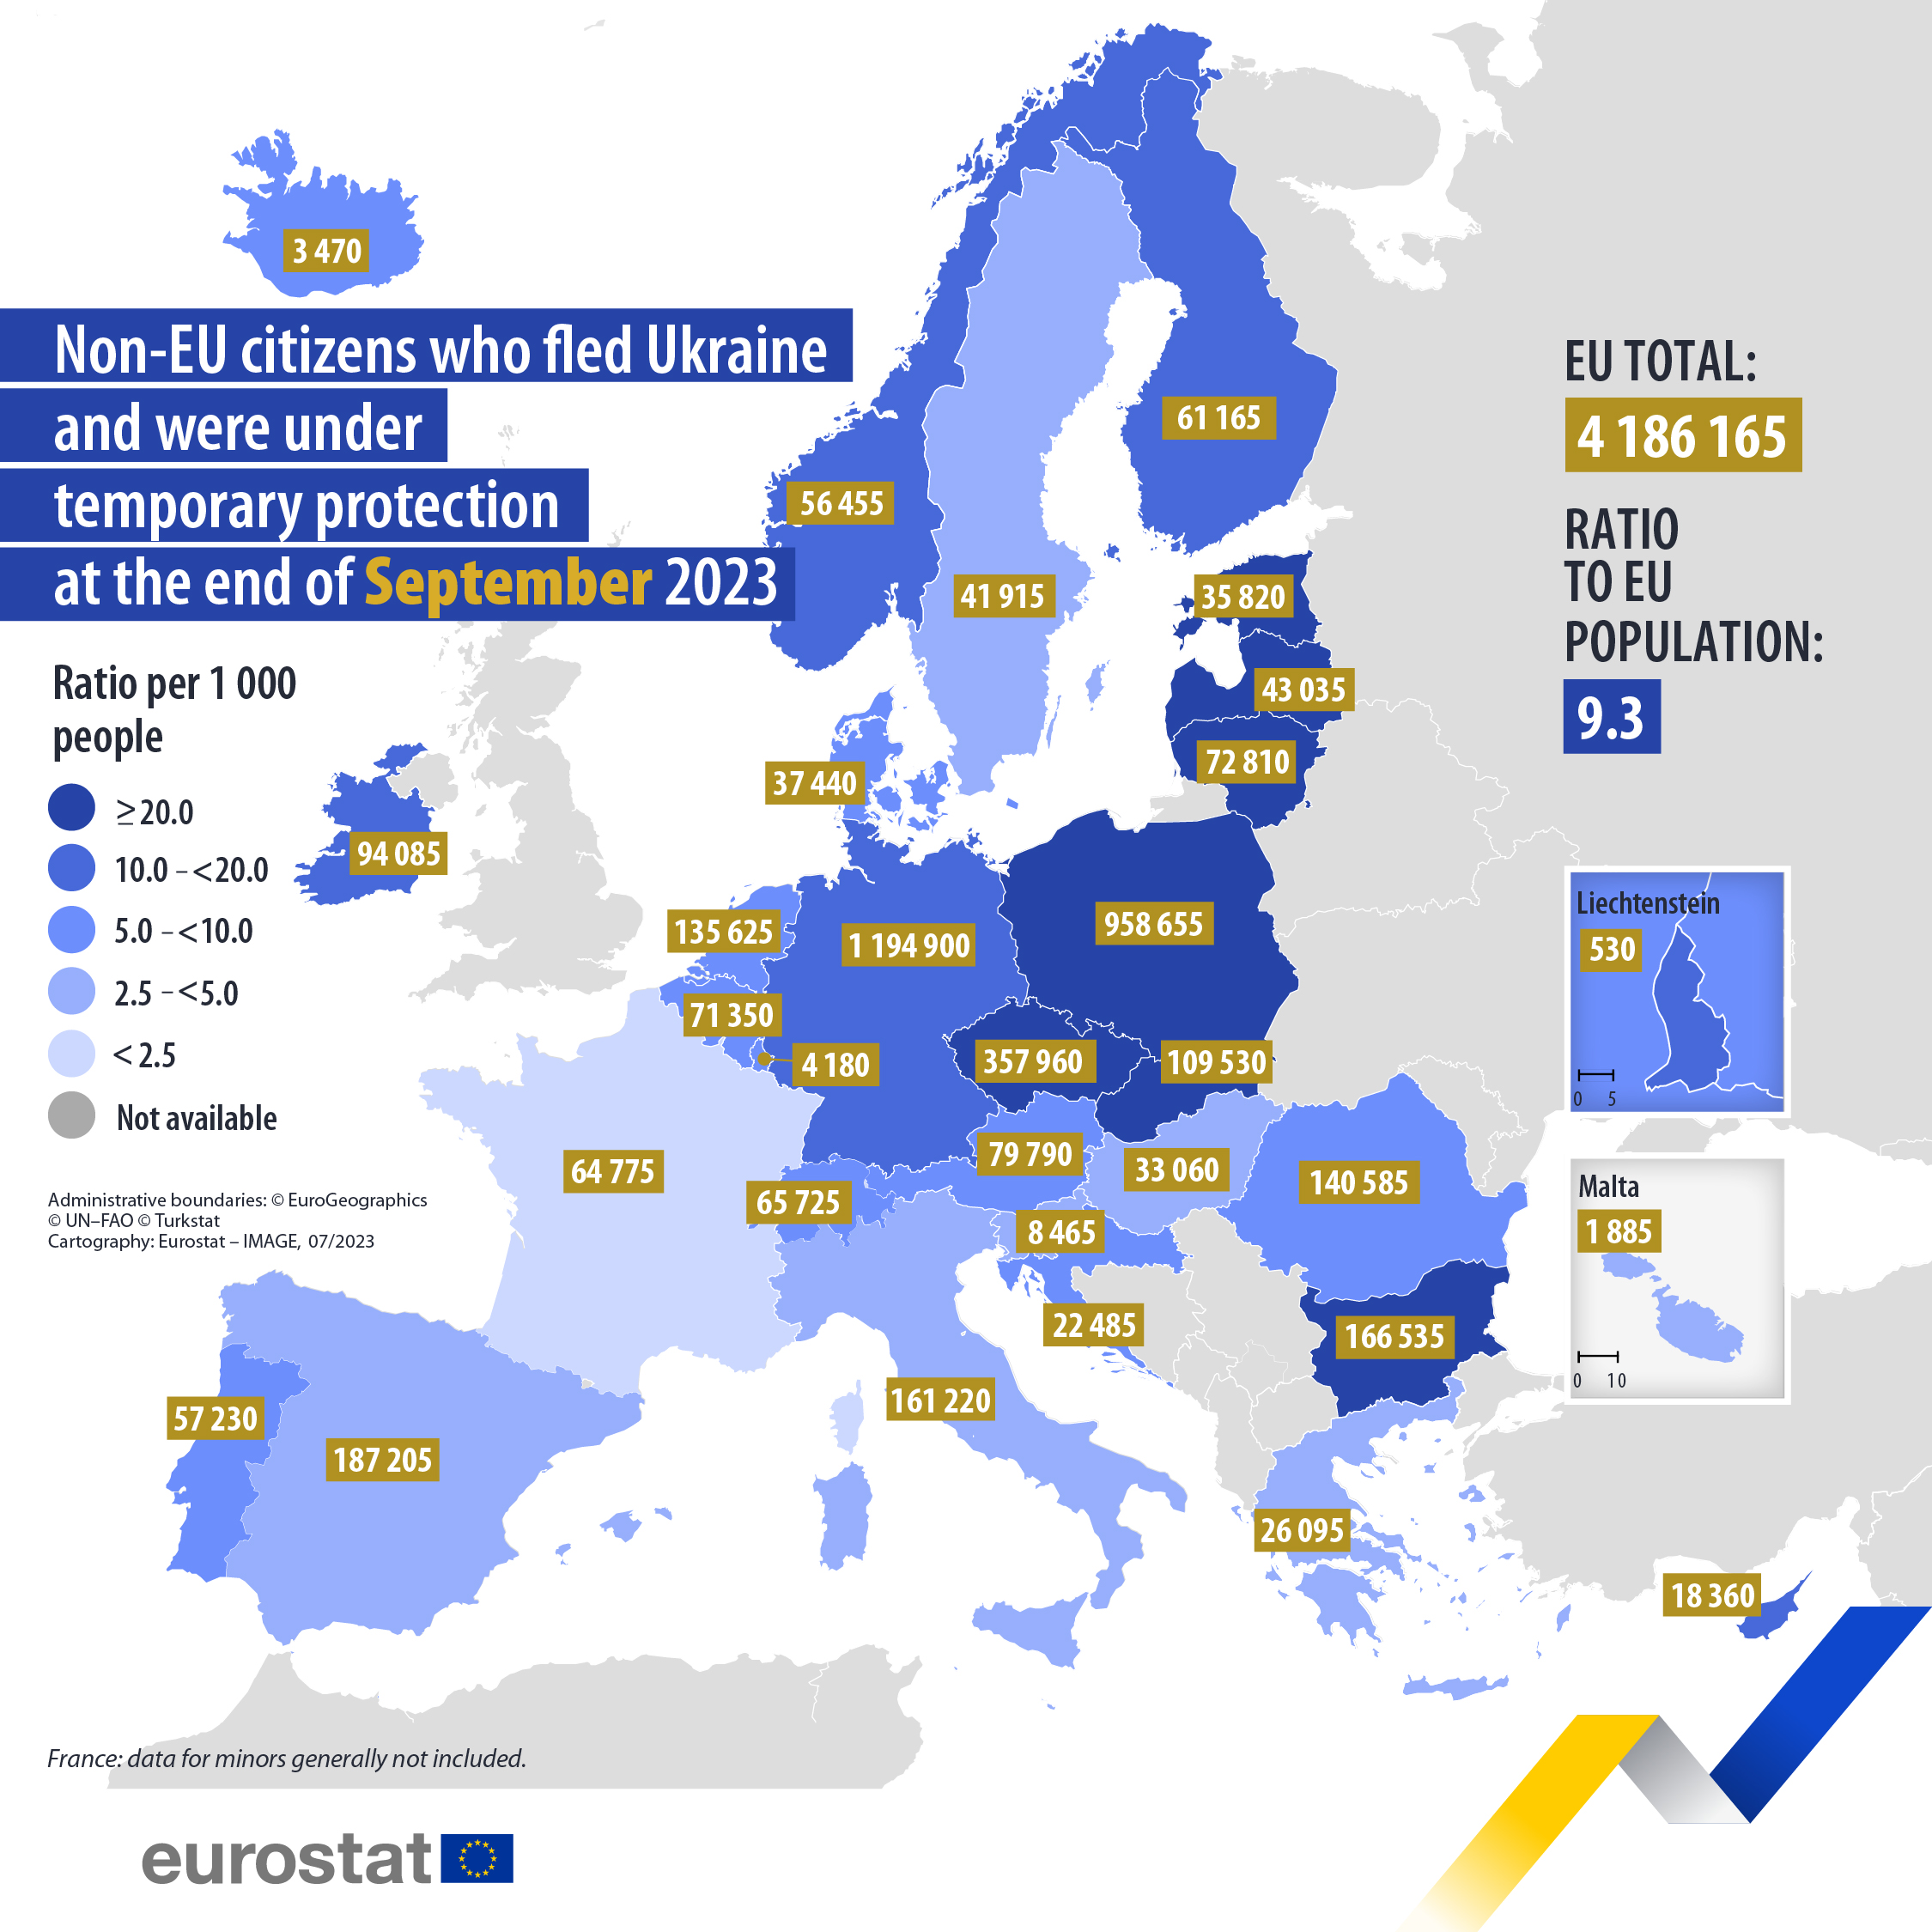 MAP: non-EU citizens who fleed Ukraine and were under temporary protection at the end of September 2023